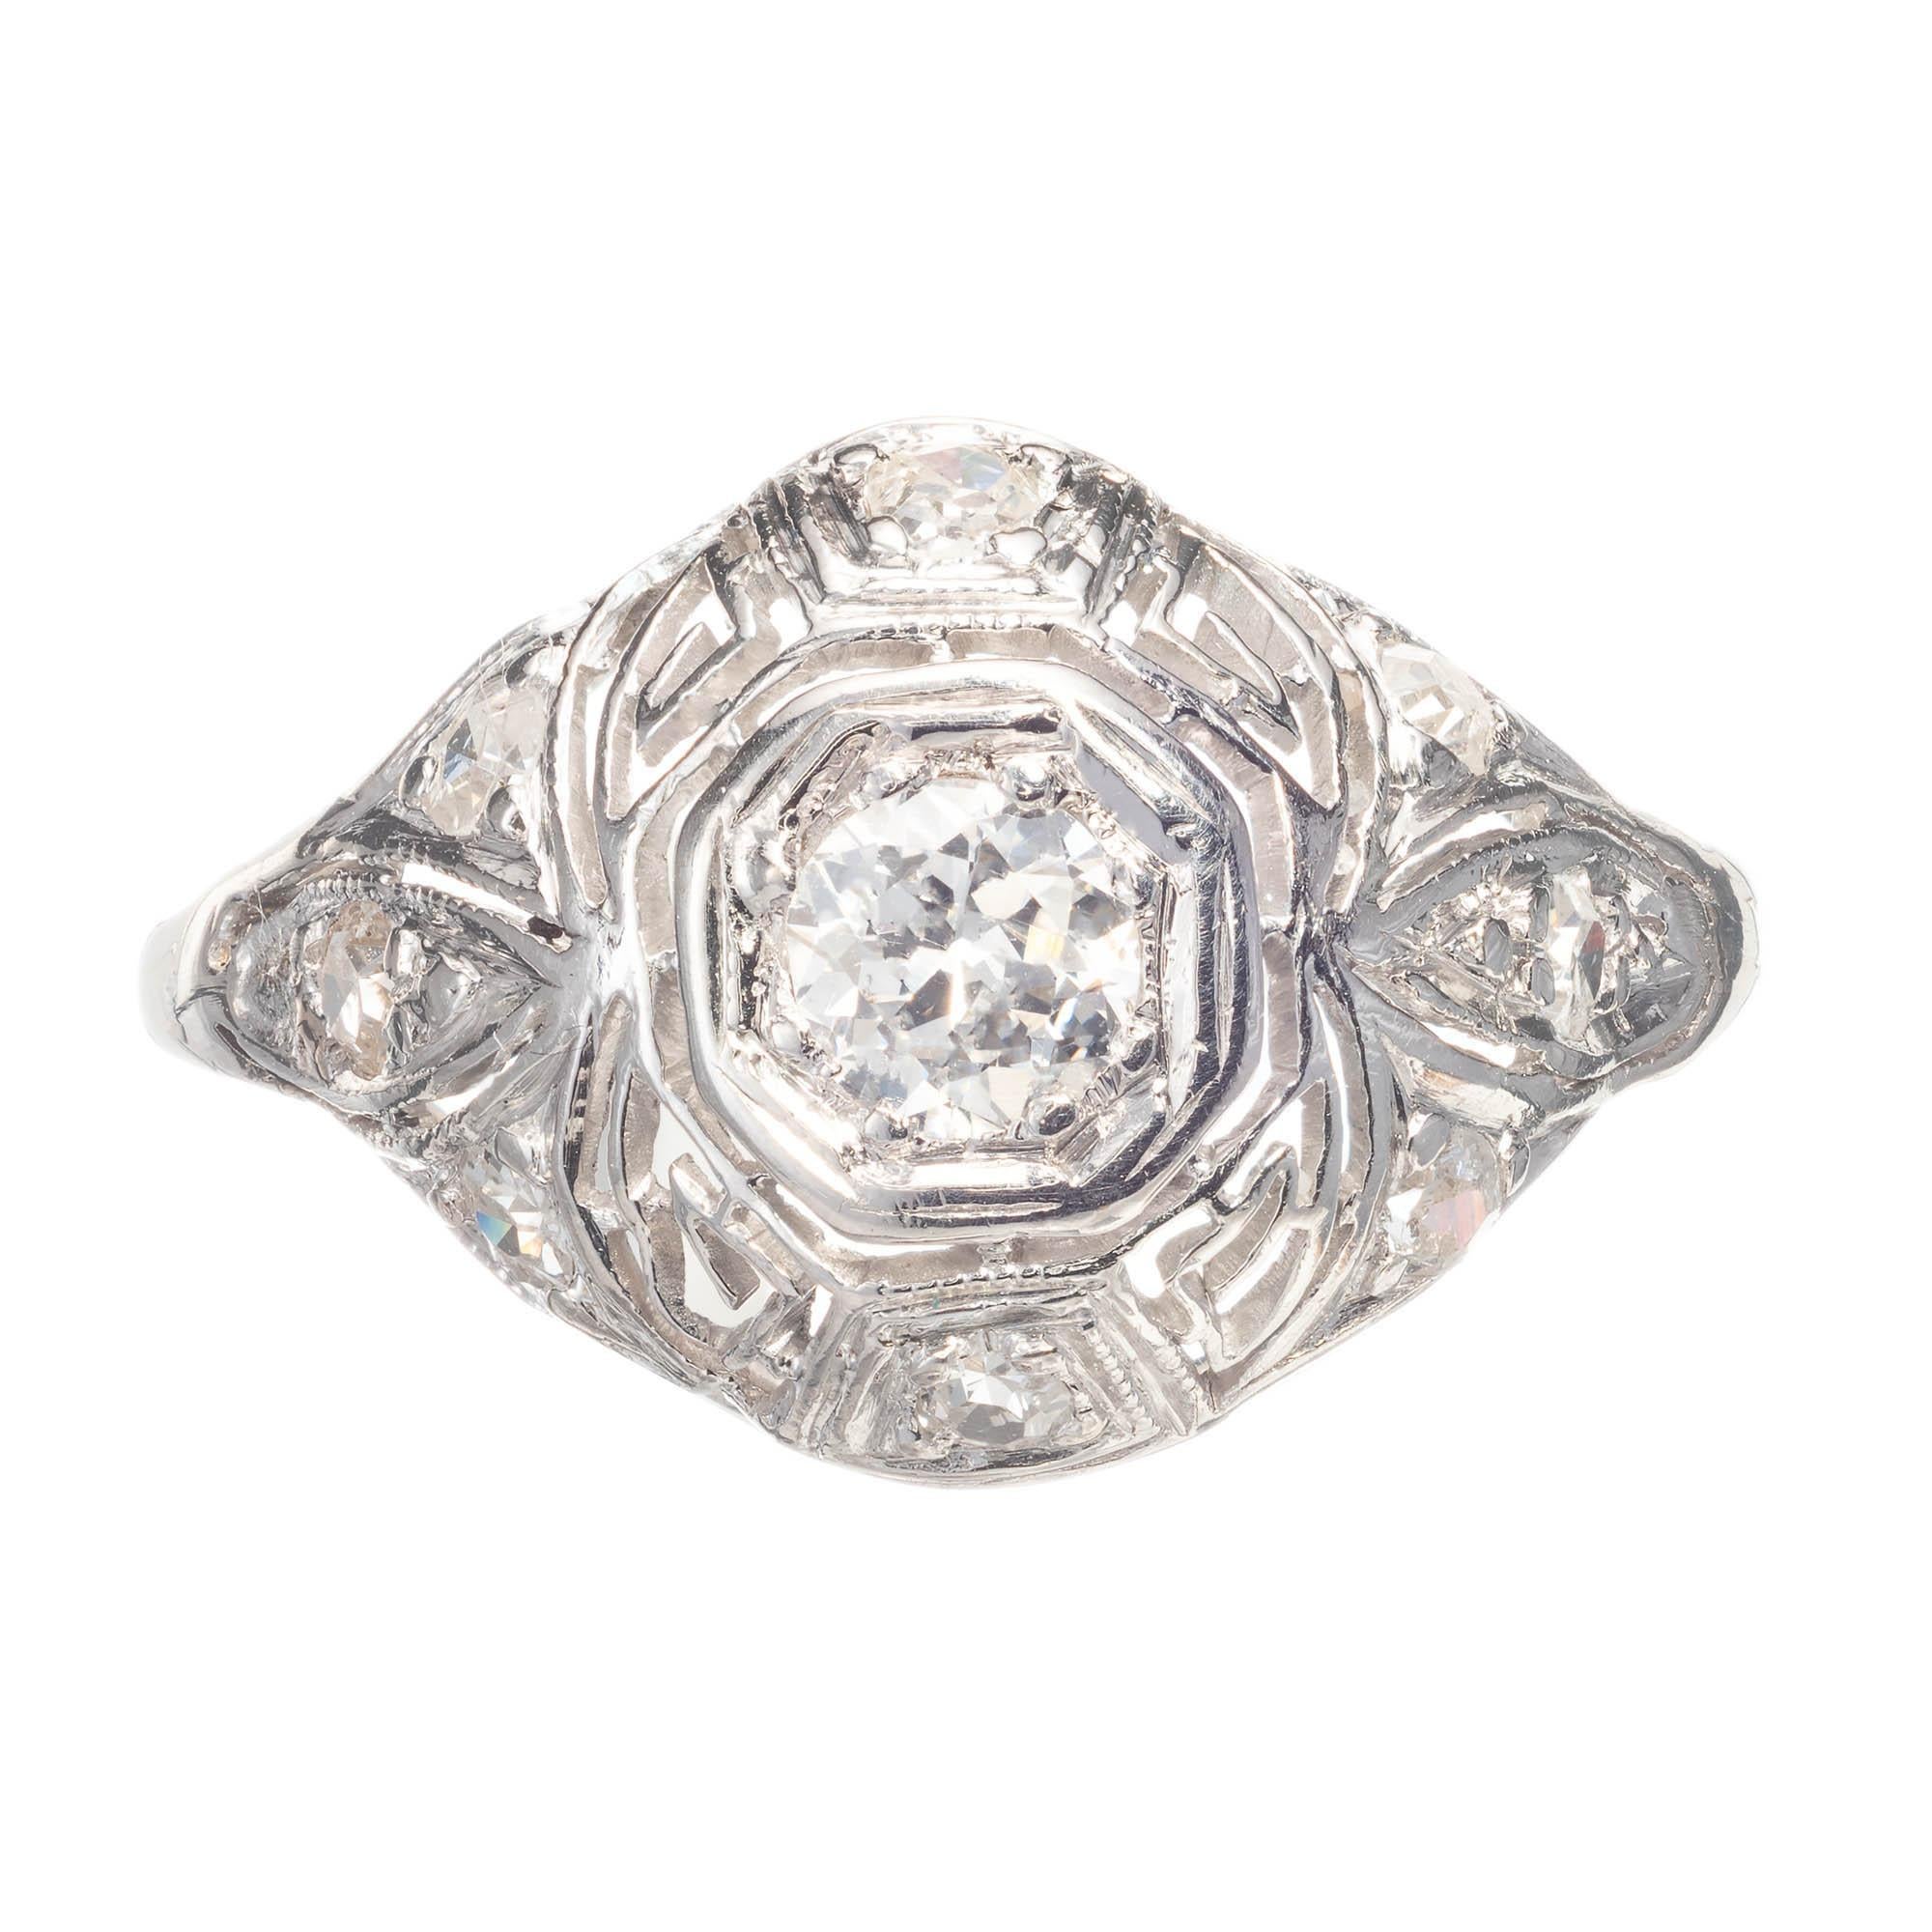 Diamond platinum Art Deco engagement ring. Center diamond is bezel set on top of a filigree style dome platinum setting. with smaller antique single cut diamonds set occasionally around ring. 

1 Old mine cut G-H SI2 diamond, Approx. .30 carats EGL